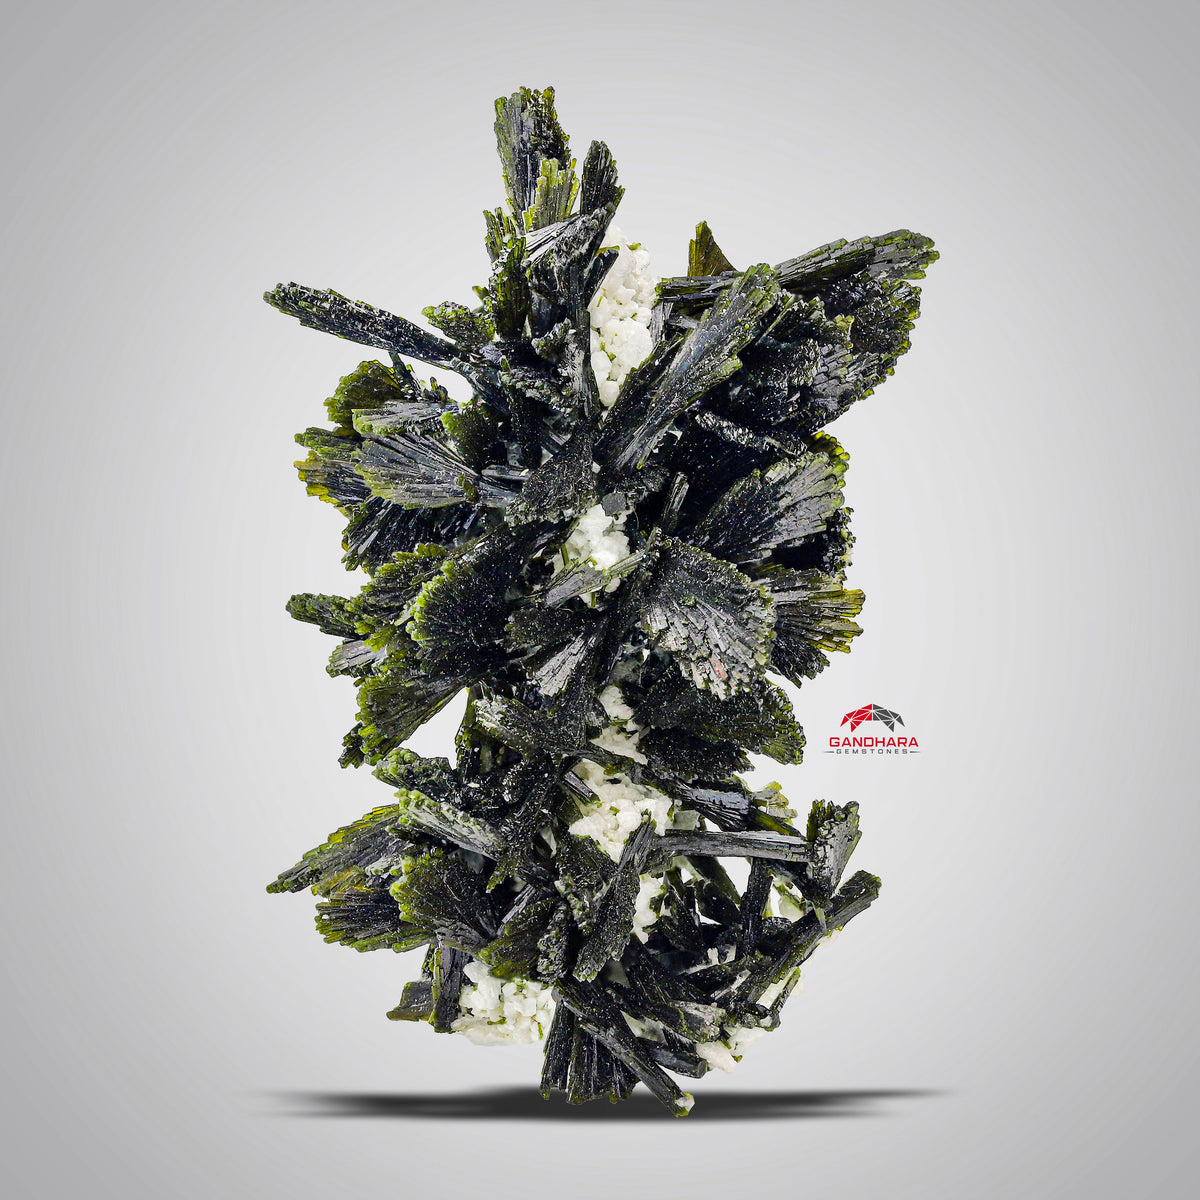 Magnificent Robust Cluster Of Epidote Crystals On Matrix